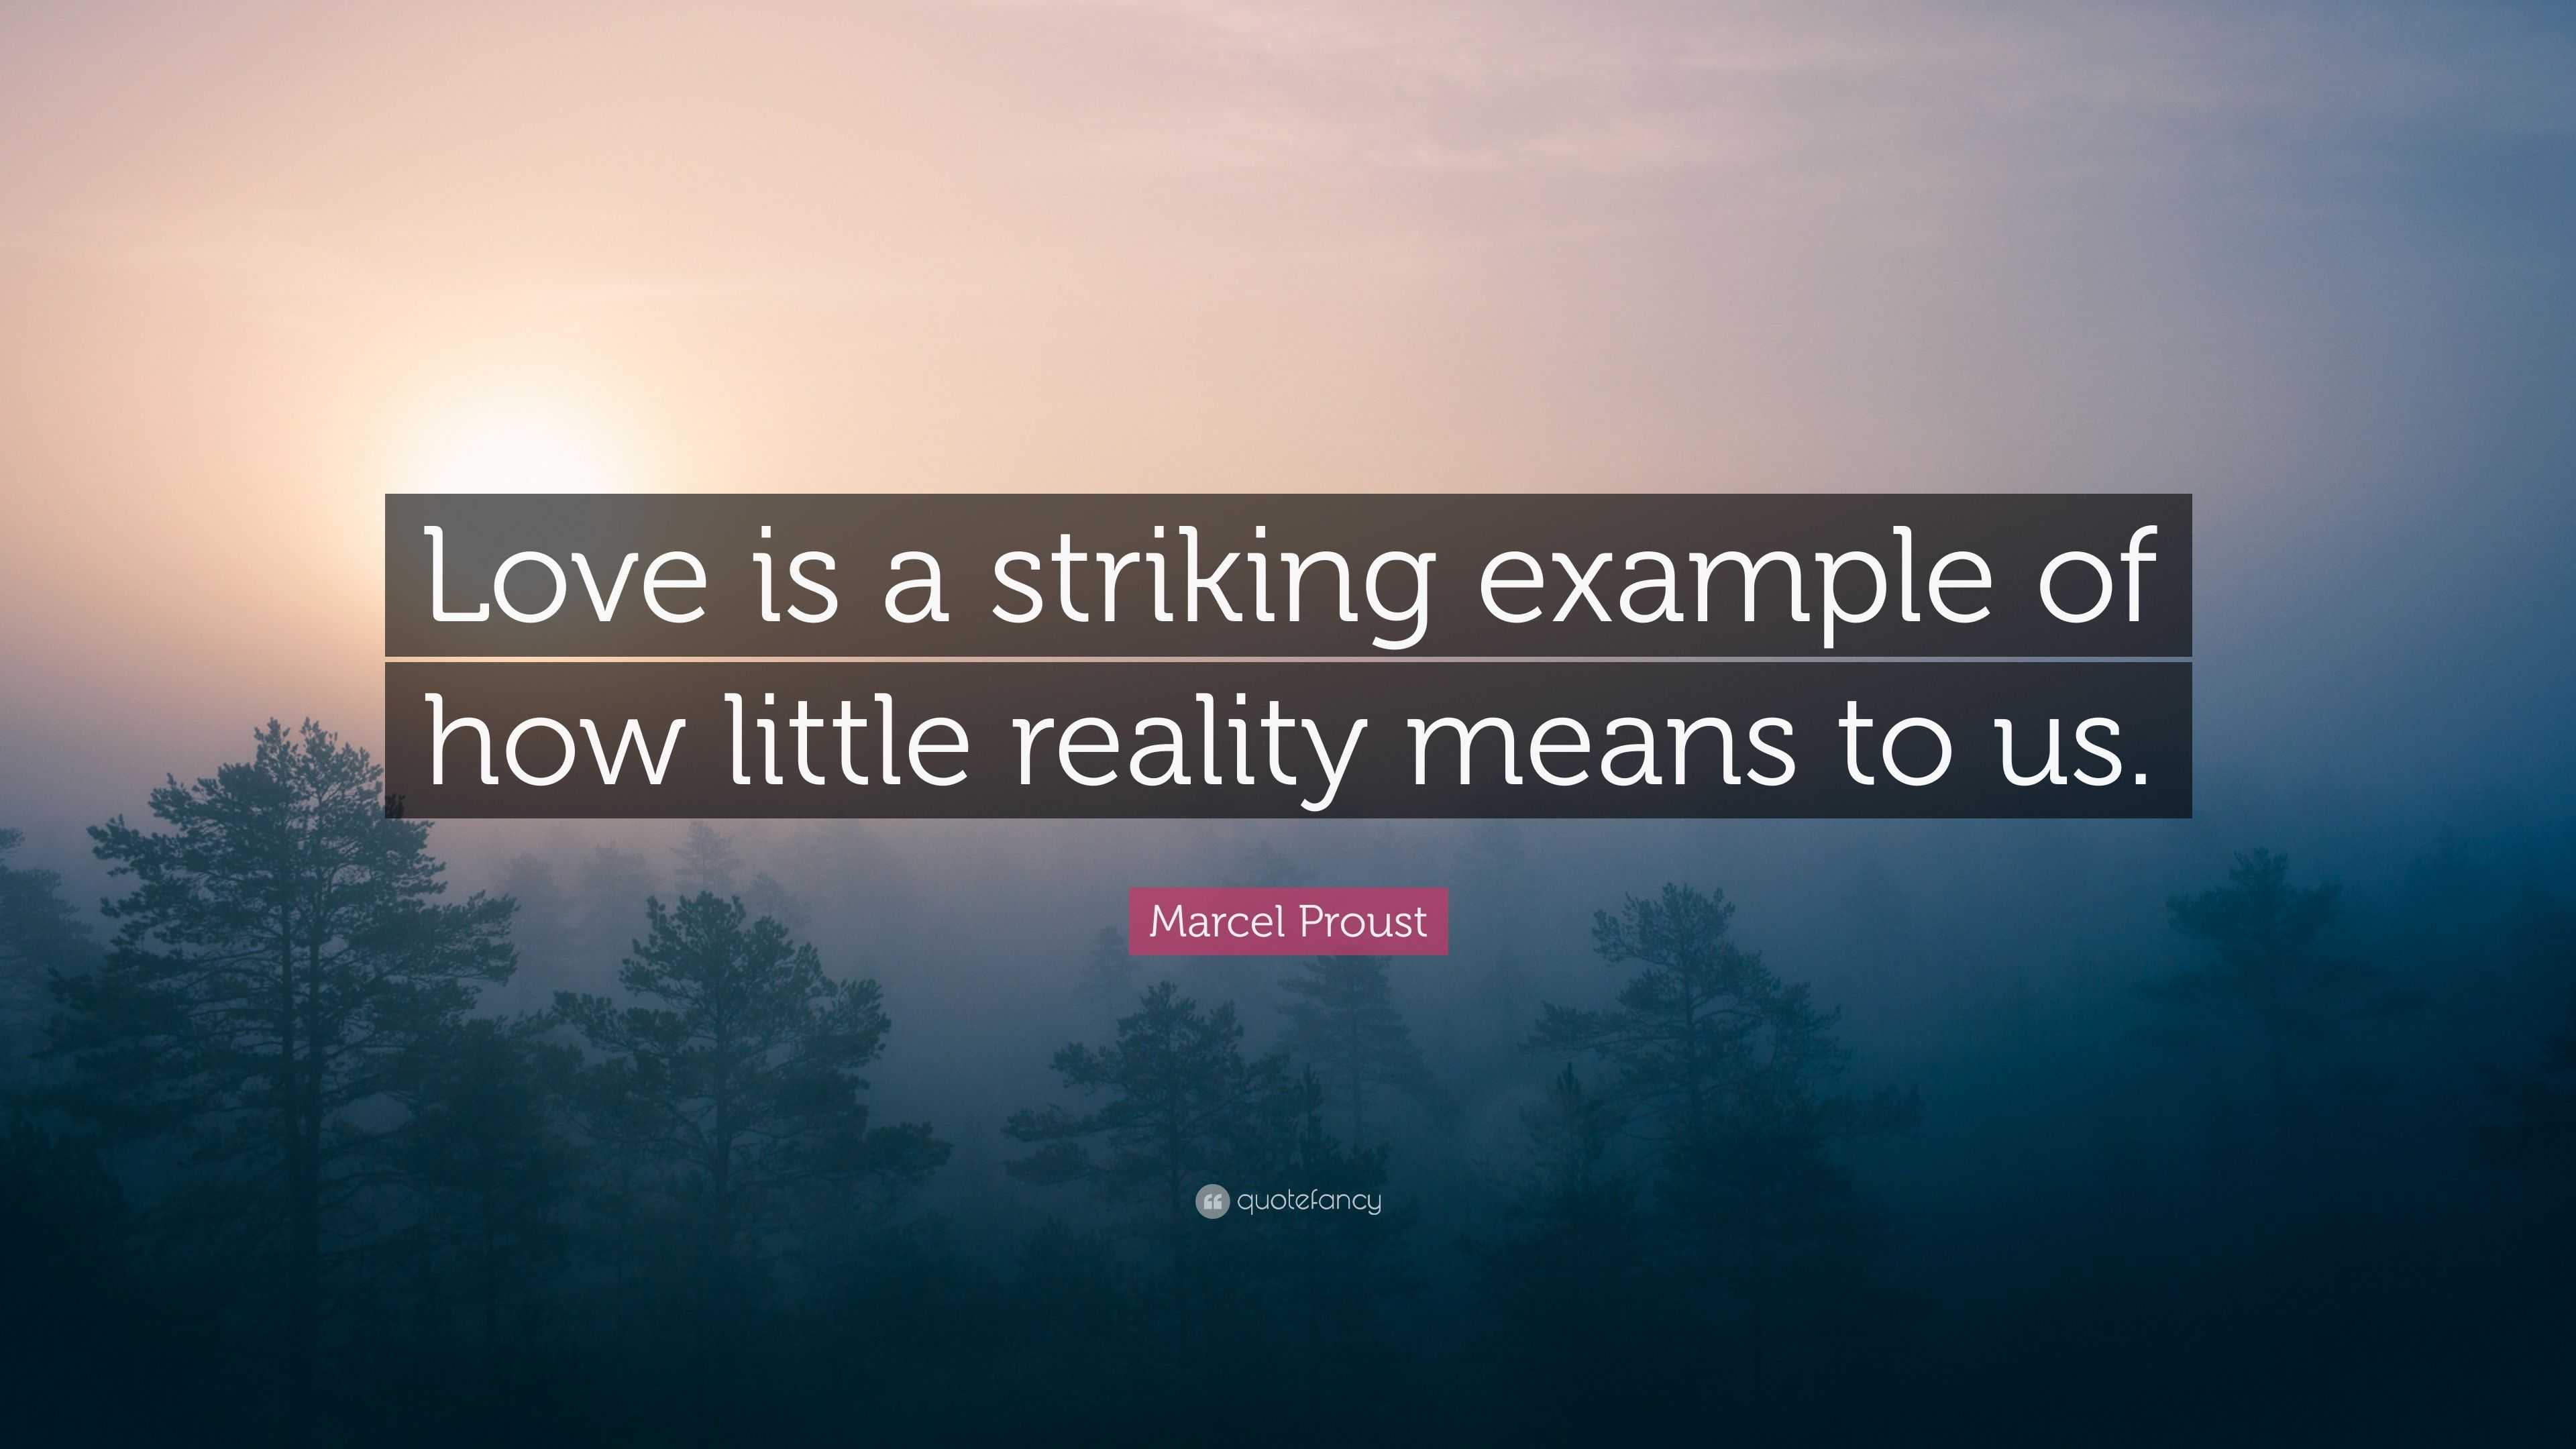 Marcel Proust Quote: “Love is a striking example of how little reality ...